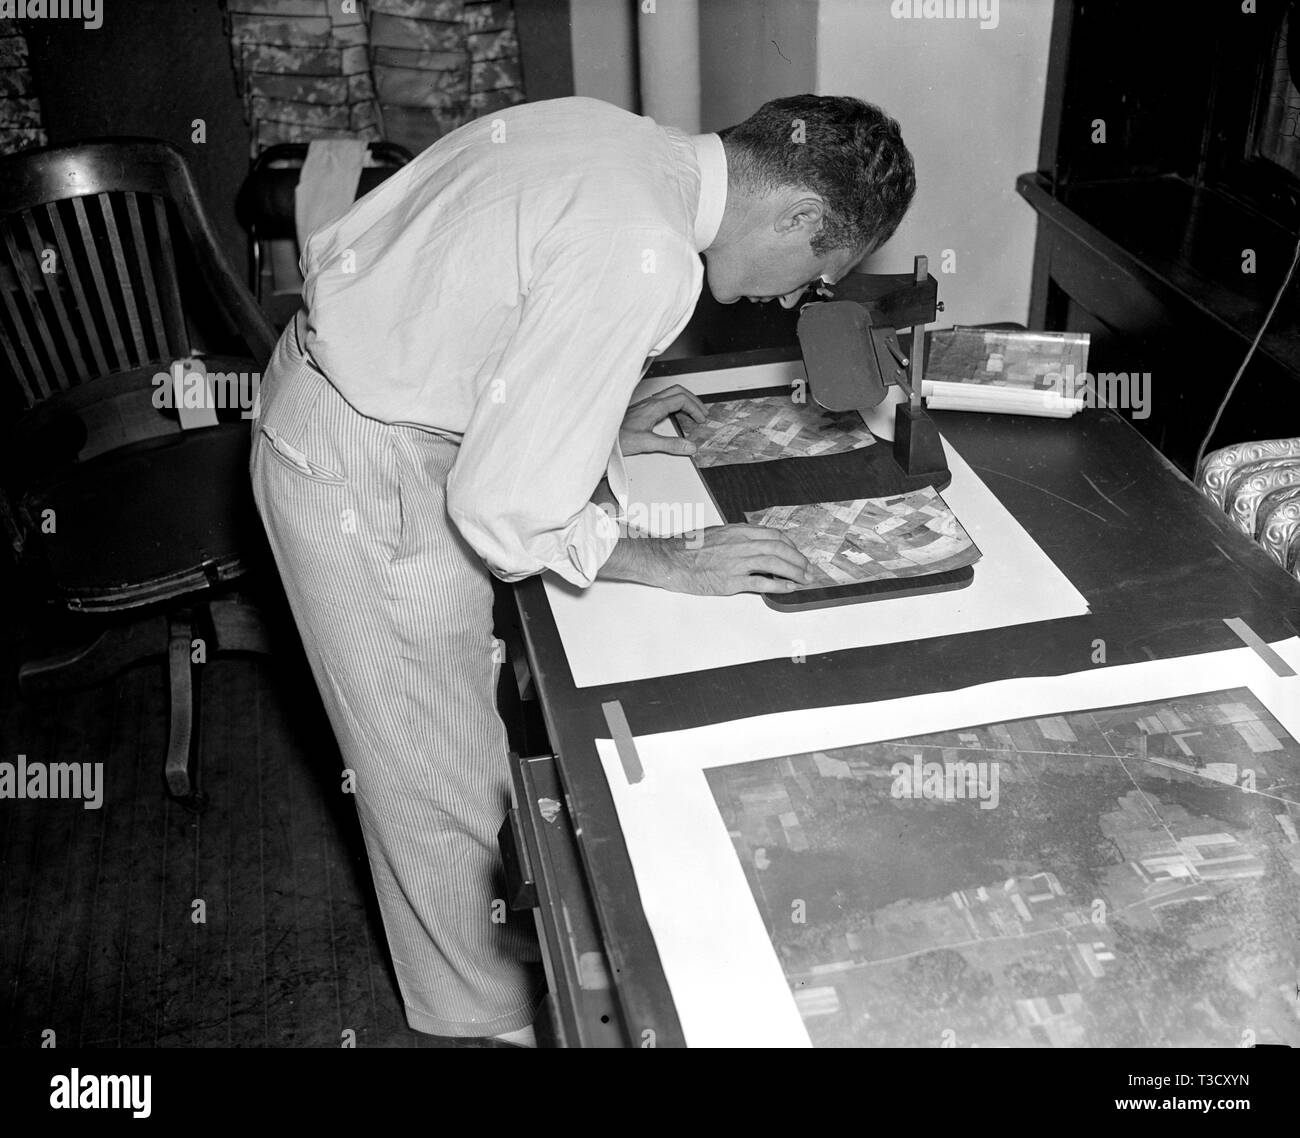 A worker is shown making a stereoscopic examination of the finished photographic prints to determine the relief or elevation of land surface for a map of the United States ca. 1937 Stock Photo